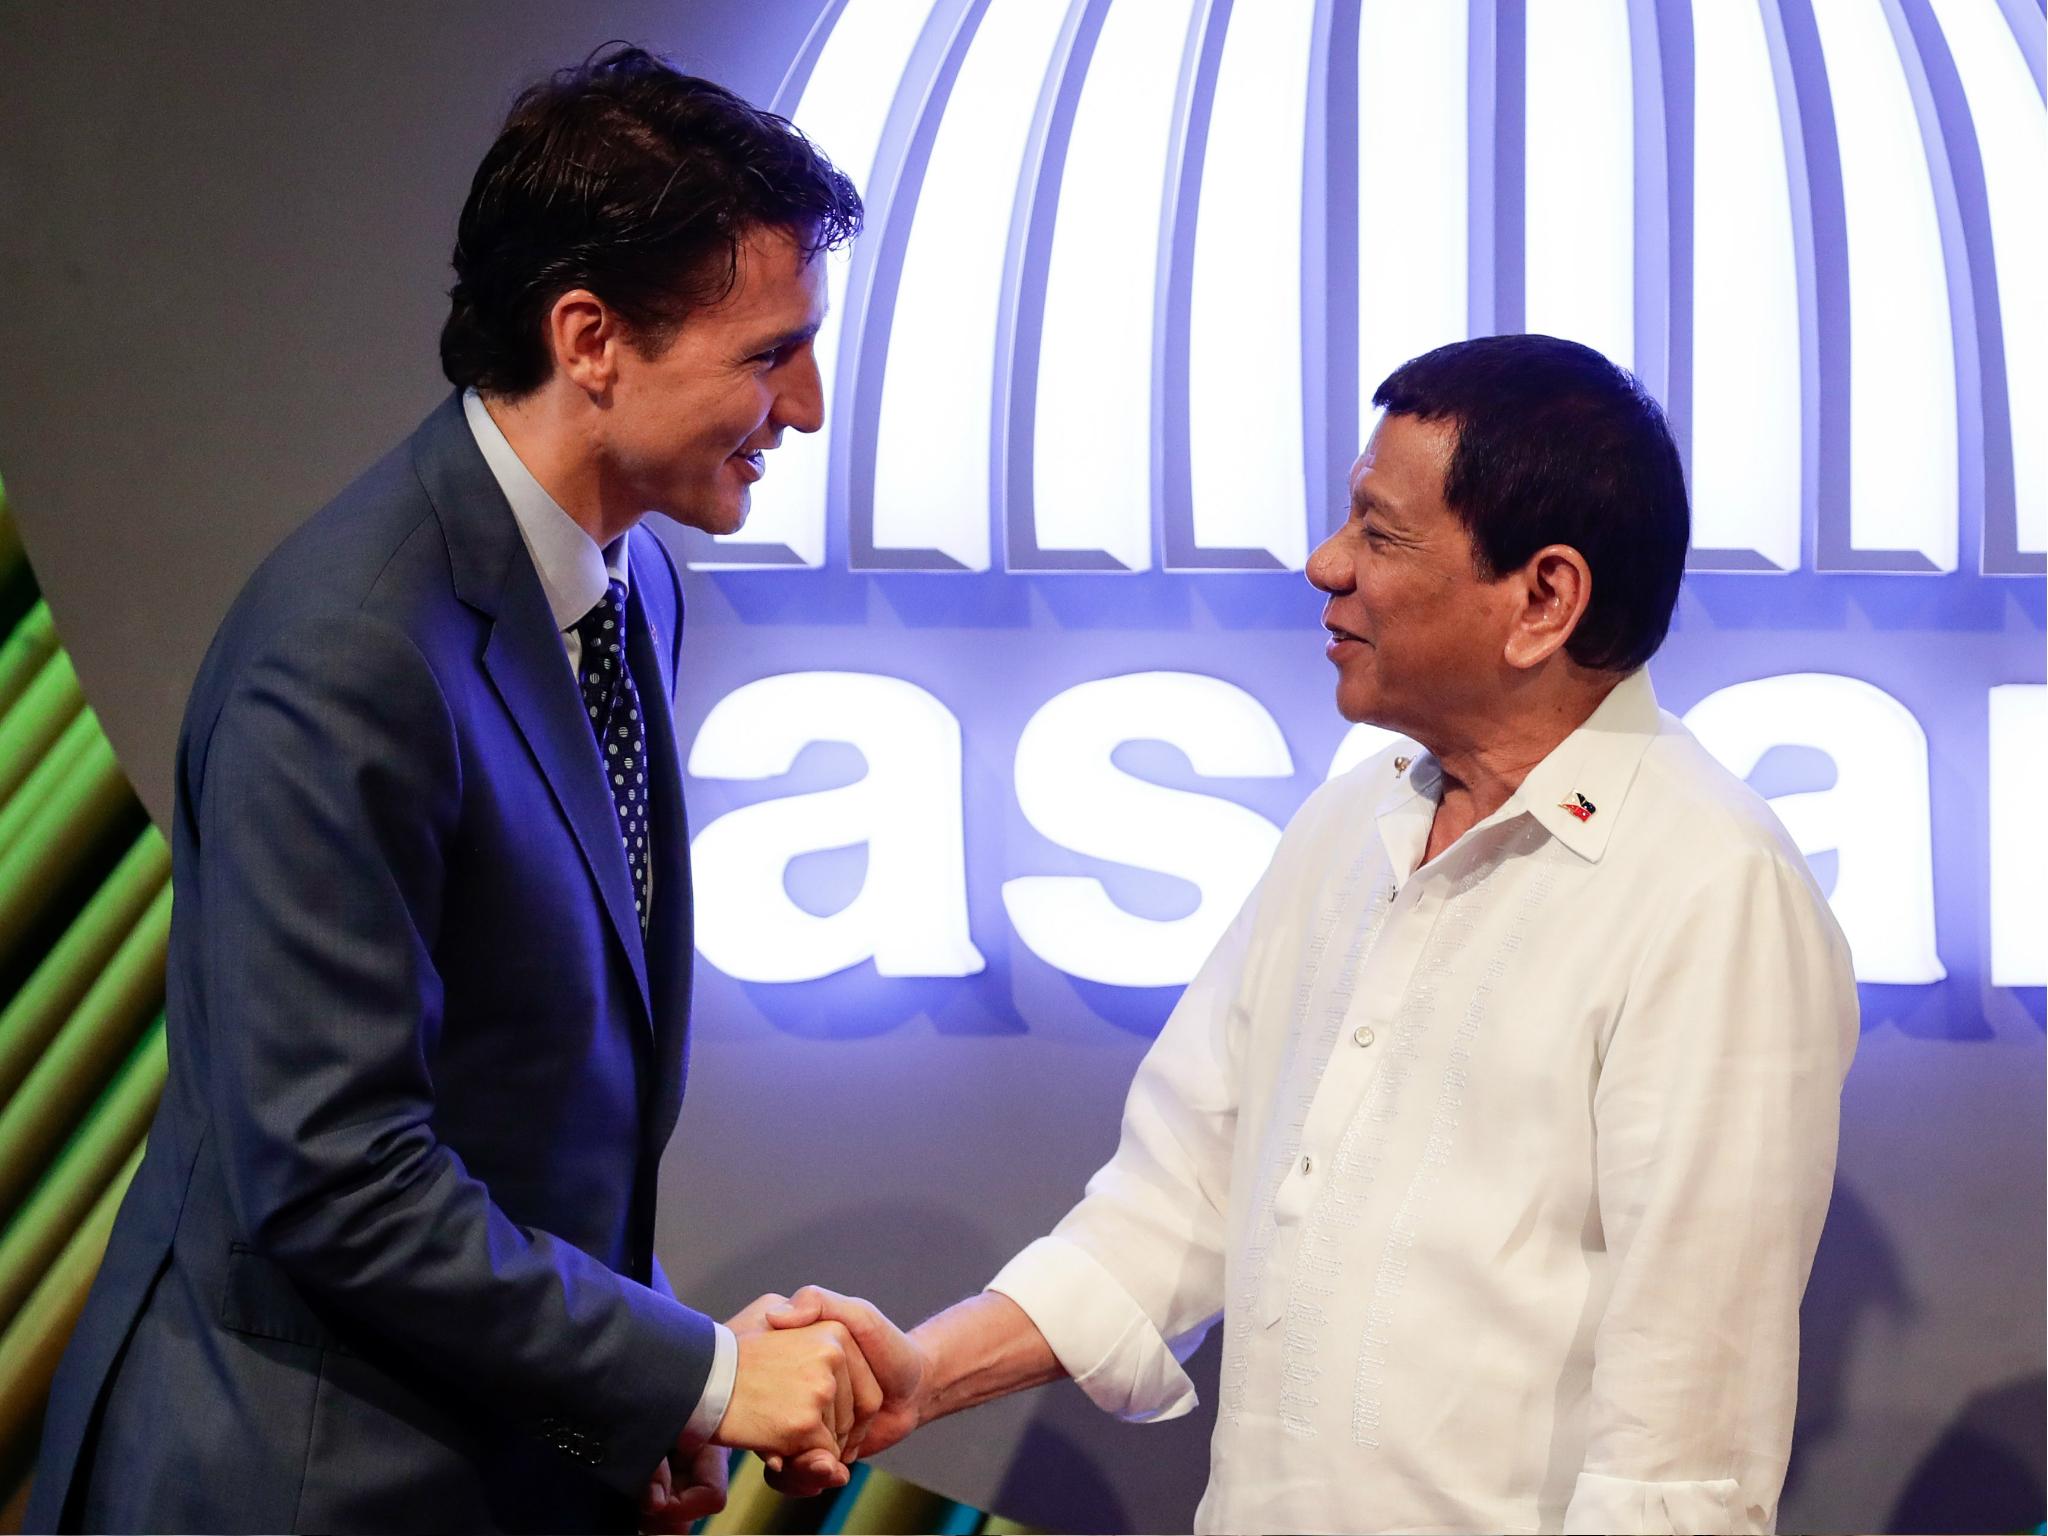 Canadian Prime Minister Justin Trudeau shakes hands with Philippine President Rodrigo Duterte at the 31st Association of Southeast Asian Nations (ASEAN) Summit in Manila on 13 November 2017.